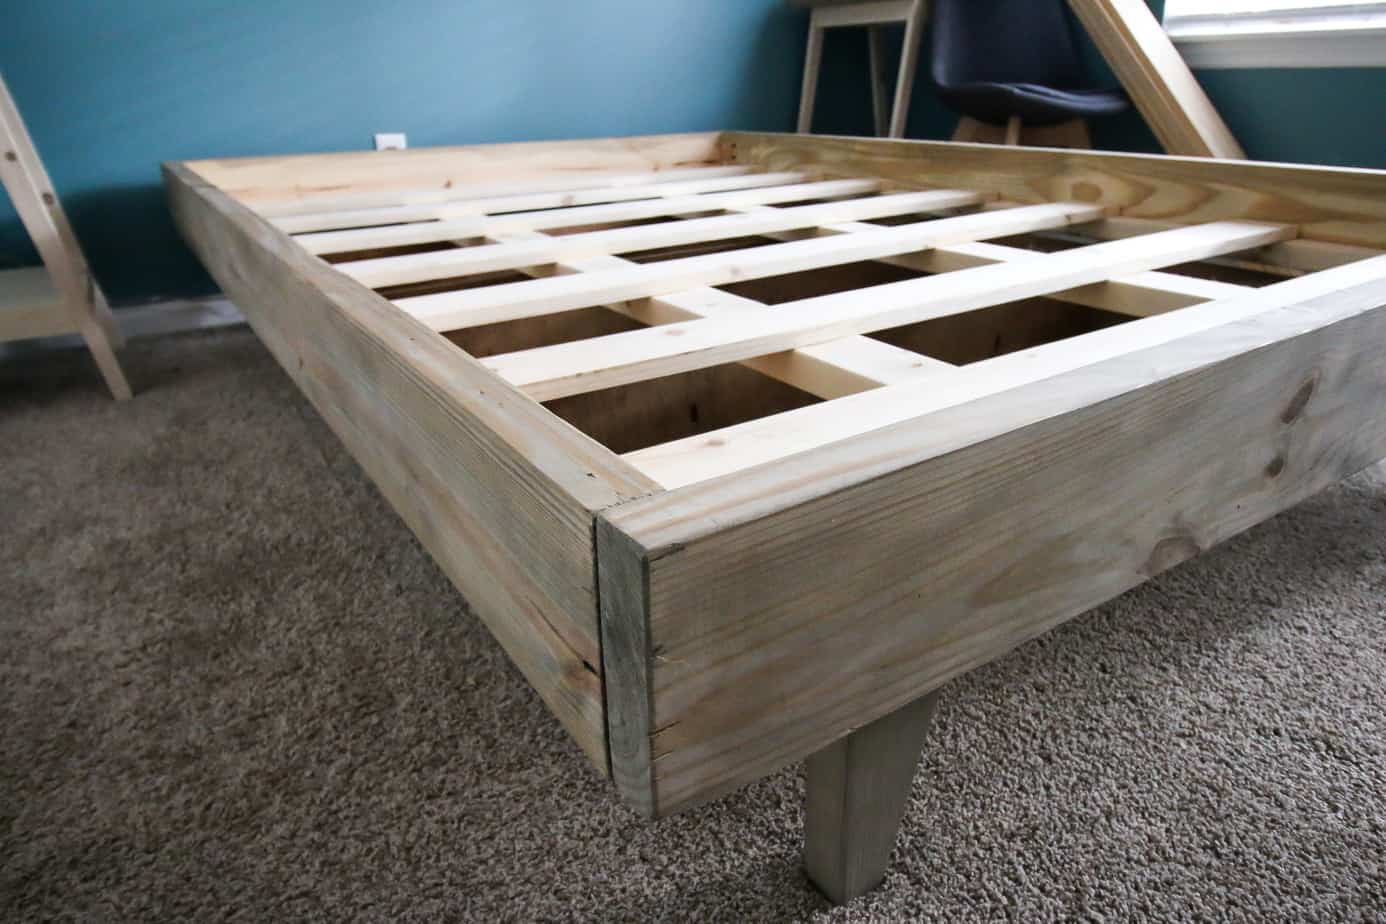 How To Build A Platform Bed For 50 Free Pdf Plans